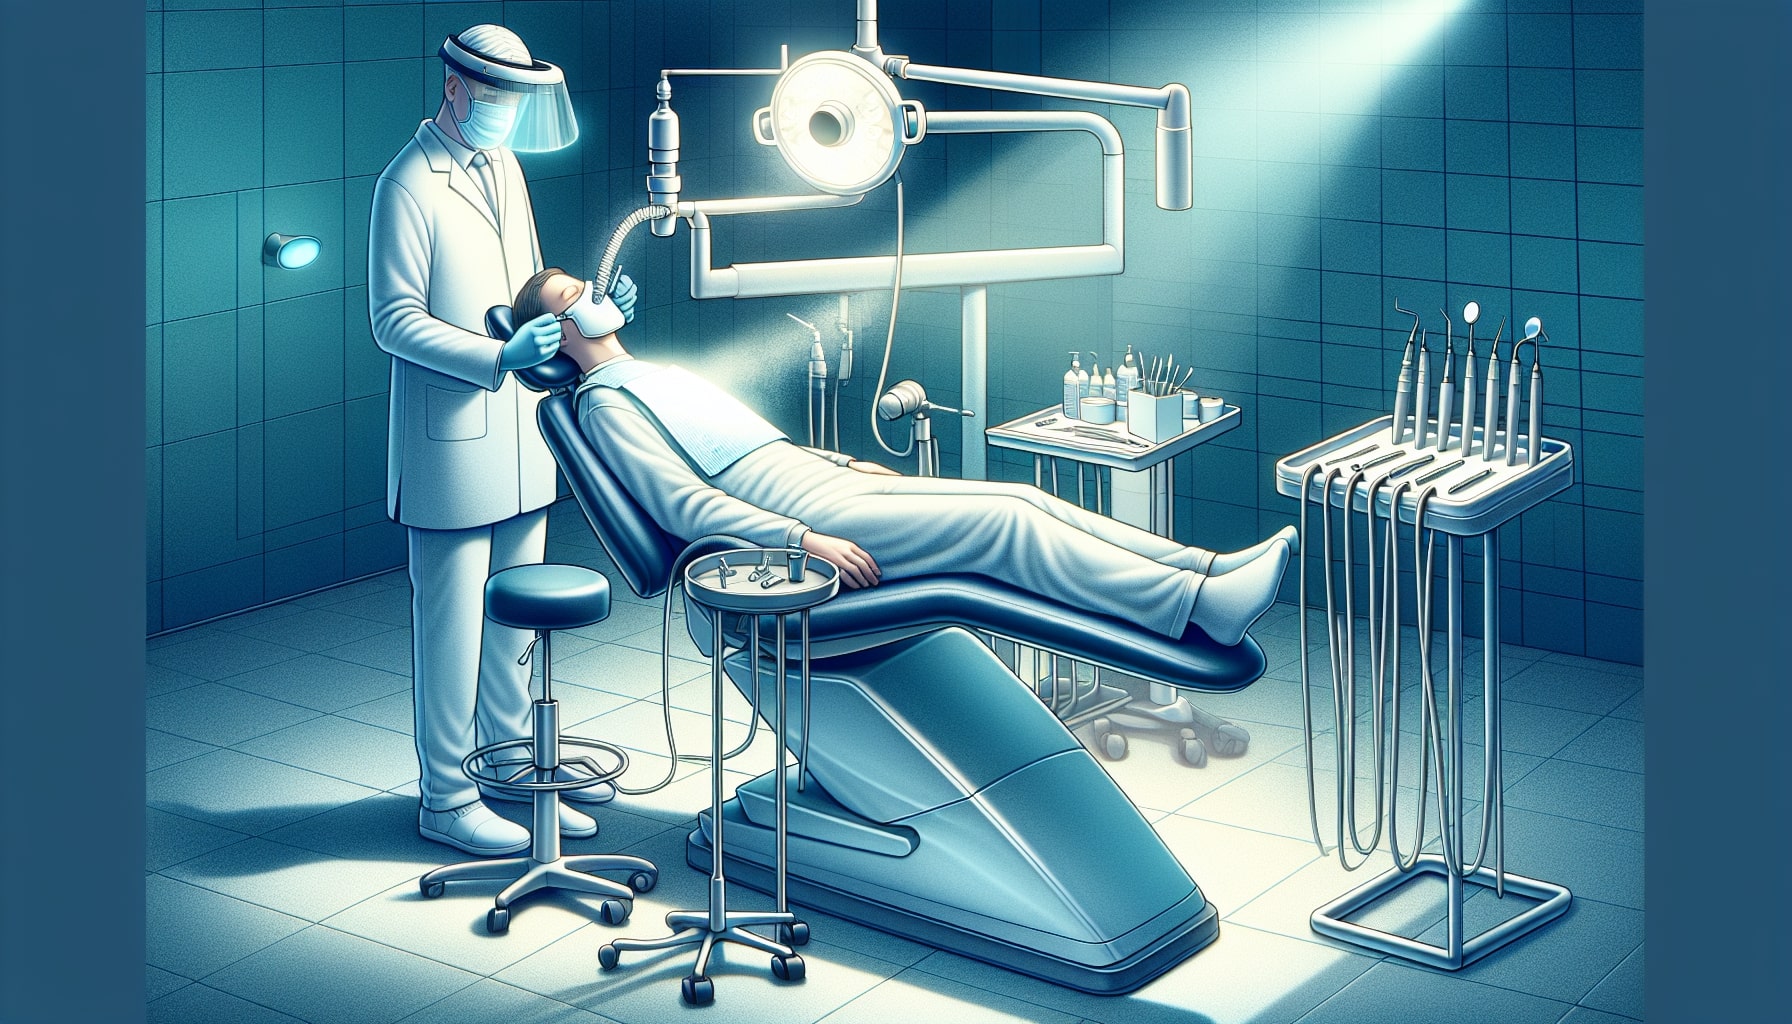 Illustration of a dental chair with a blurred figure receiving sedation